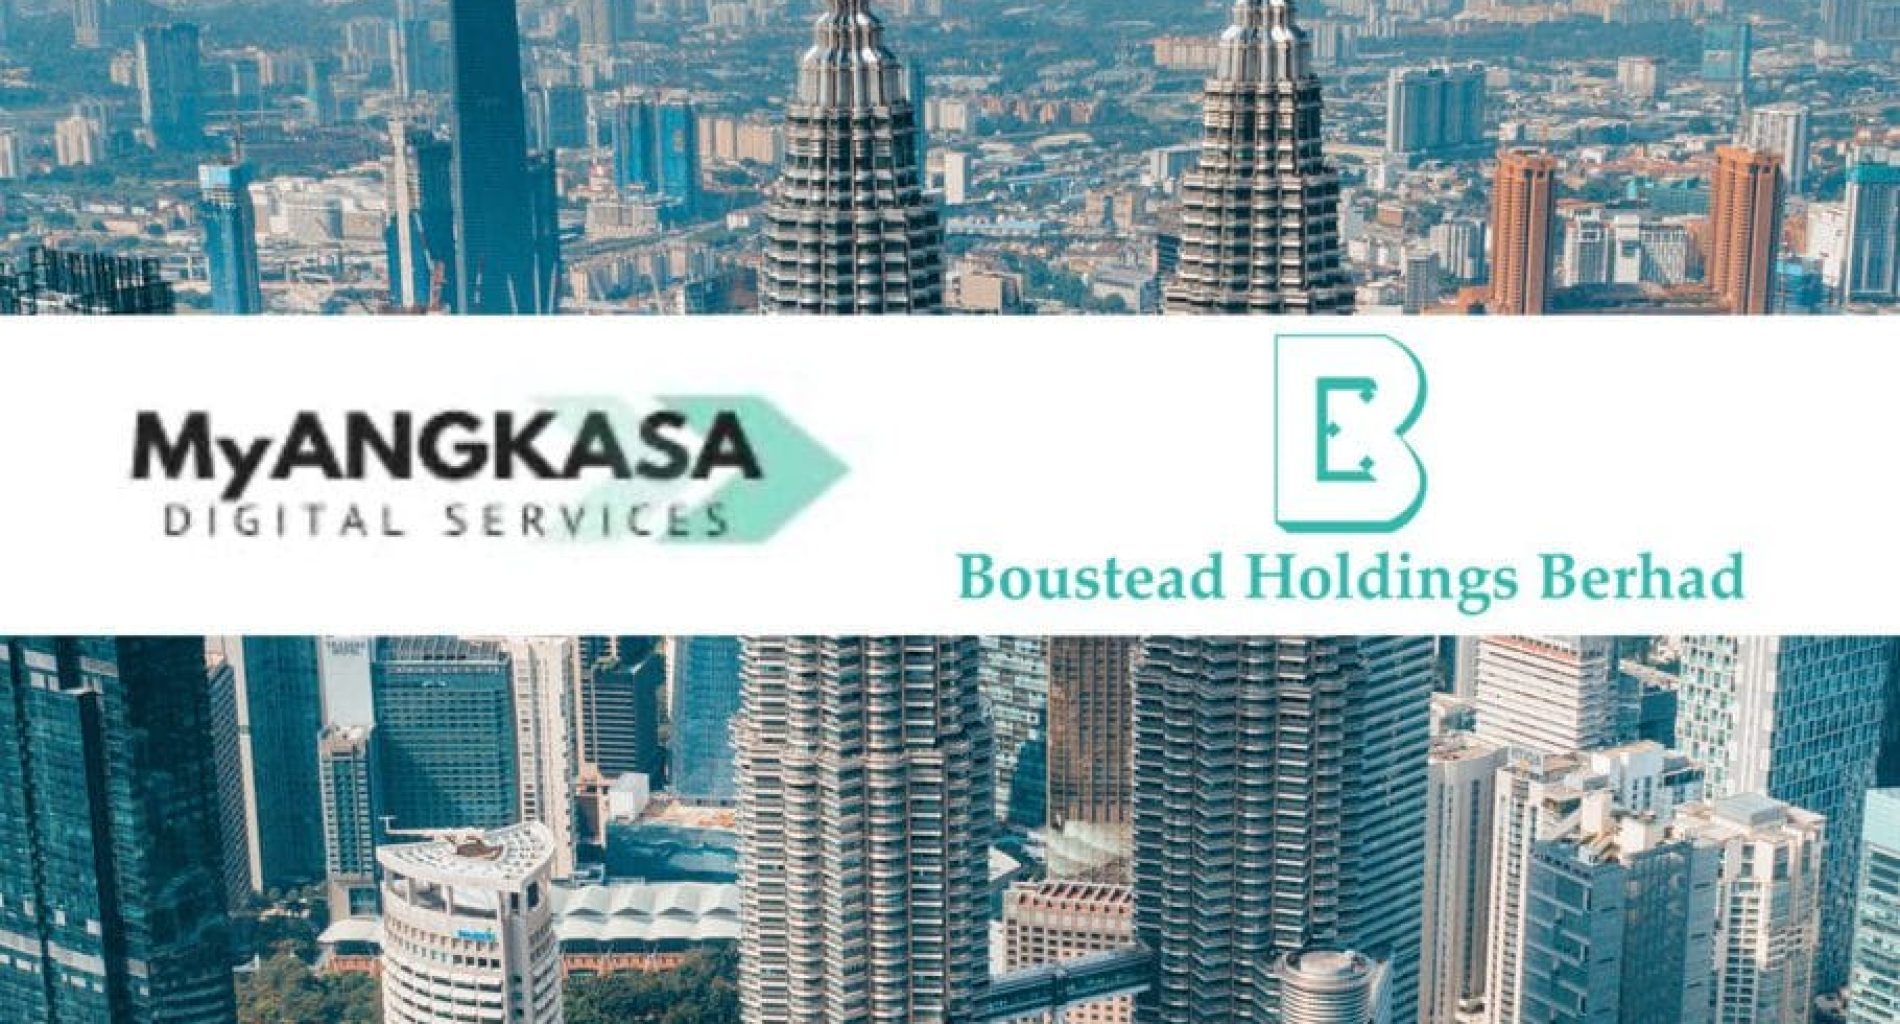 ANGKASA-Joins-Digital-Banking-Bid-With-Boustead-to-Serve-7-Million-Cooperative-Members-1440x564_c